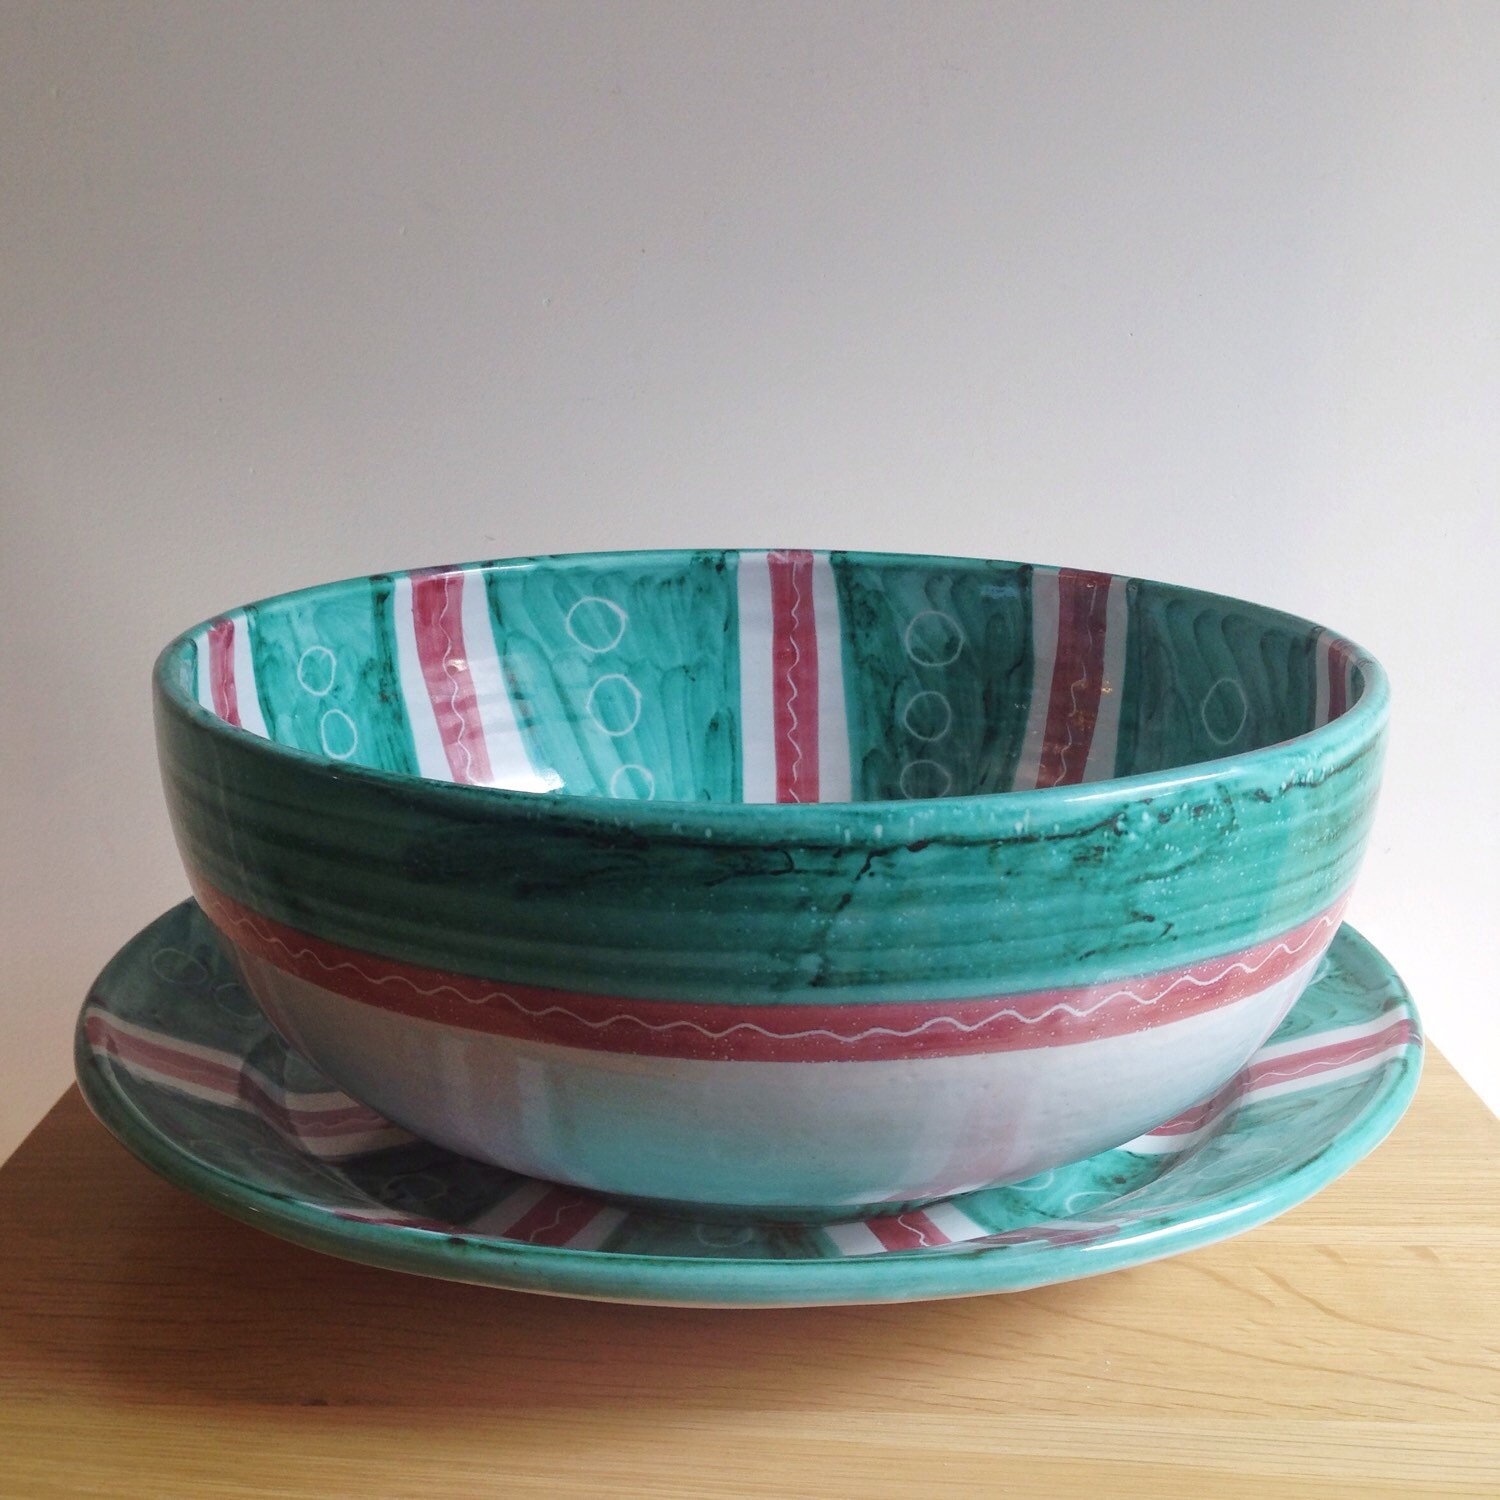 Handmade in Italy Bowl and Platter Set